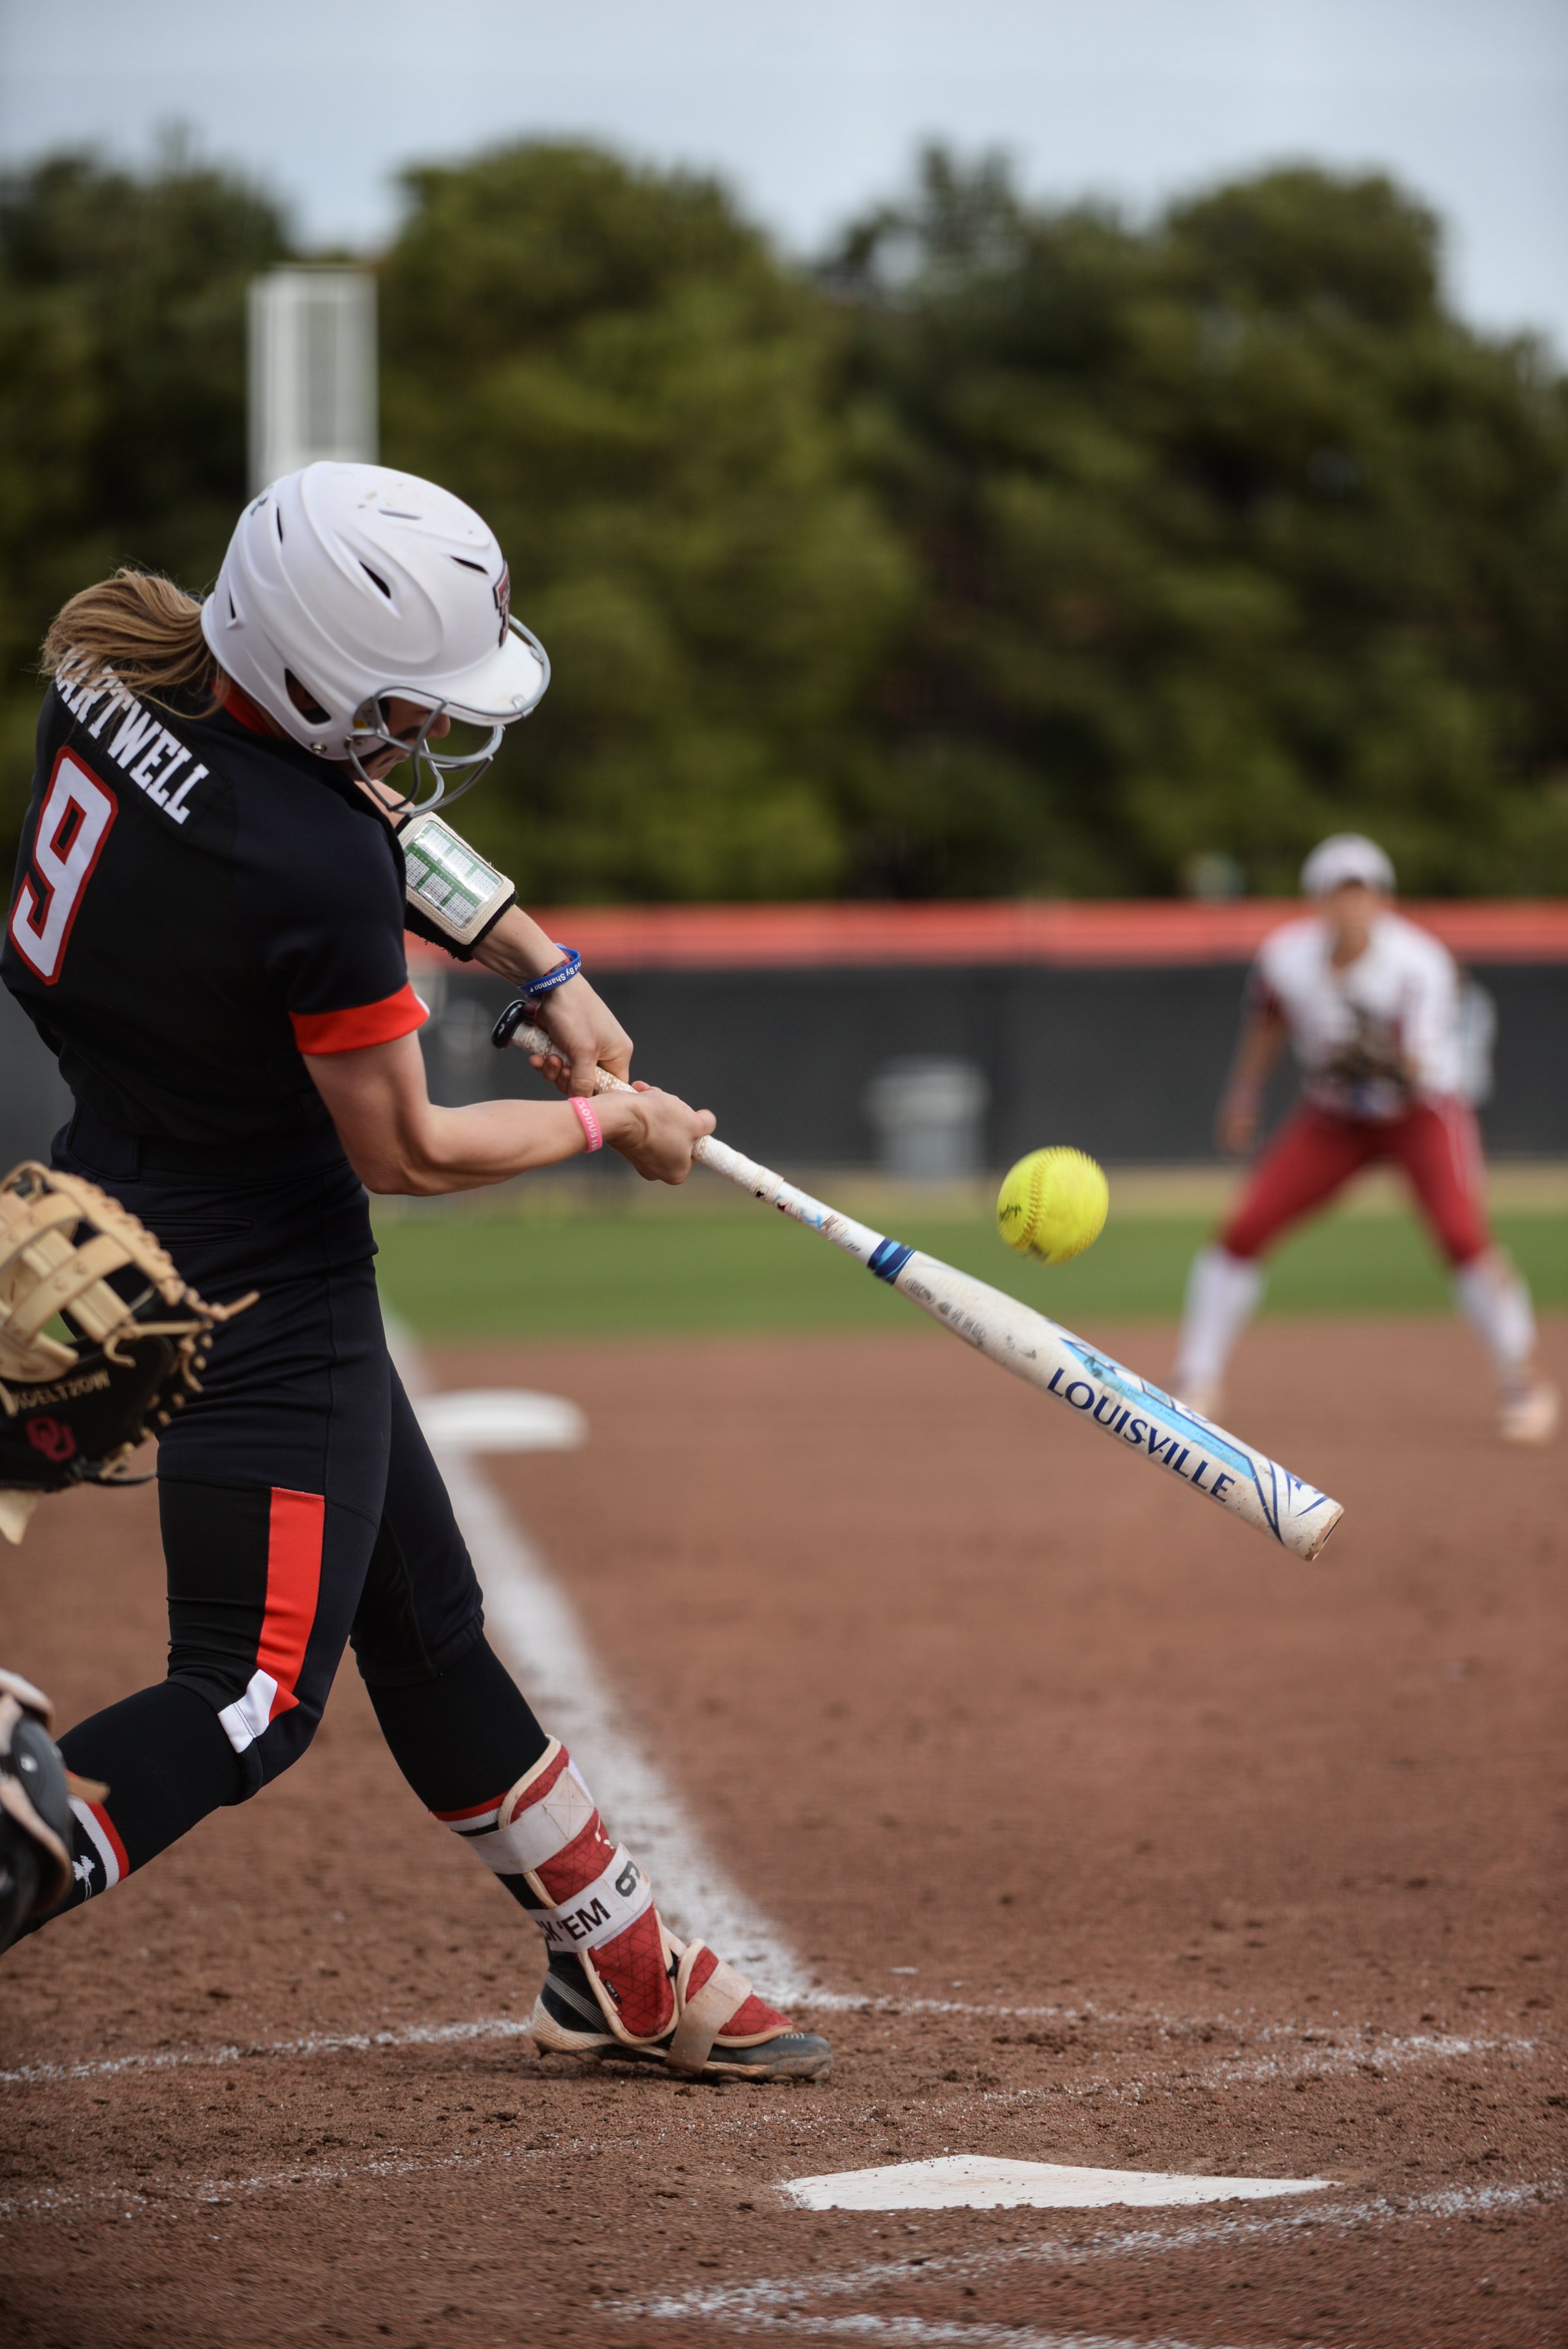  Texas Tech's Jessica Hartwell (9) hits a single during the second of a three game series against Oklahoma Saturday, March 23, 2019 at Rocky Johnson Field in Lubbock, Texas. The Lady Raiders lost to the Sooners 8-3. [Abbie Burnett/A-J Media] 